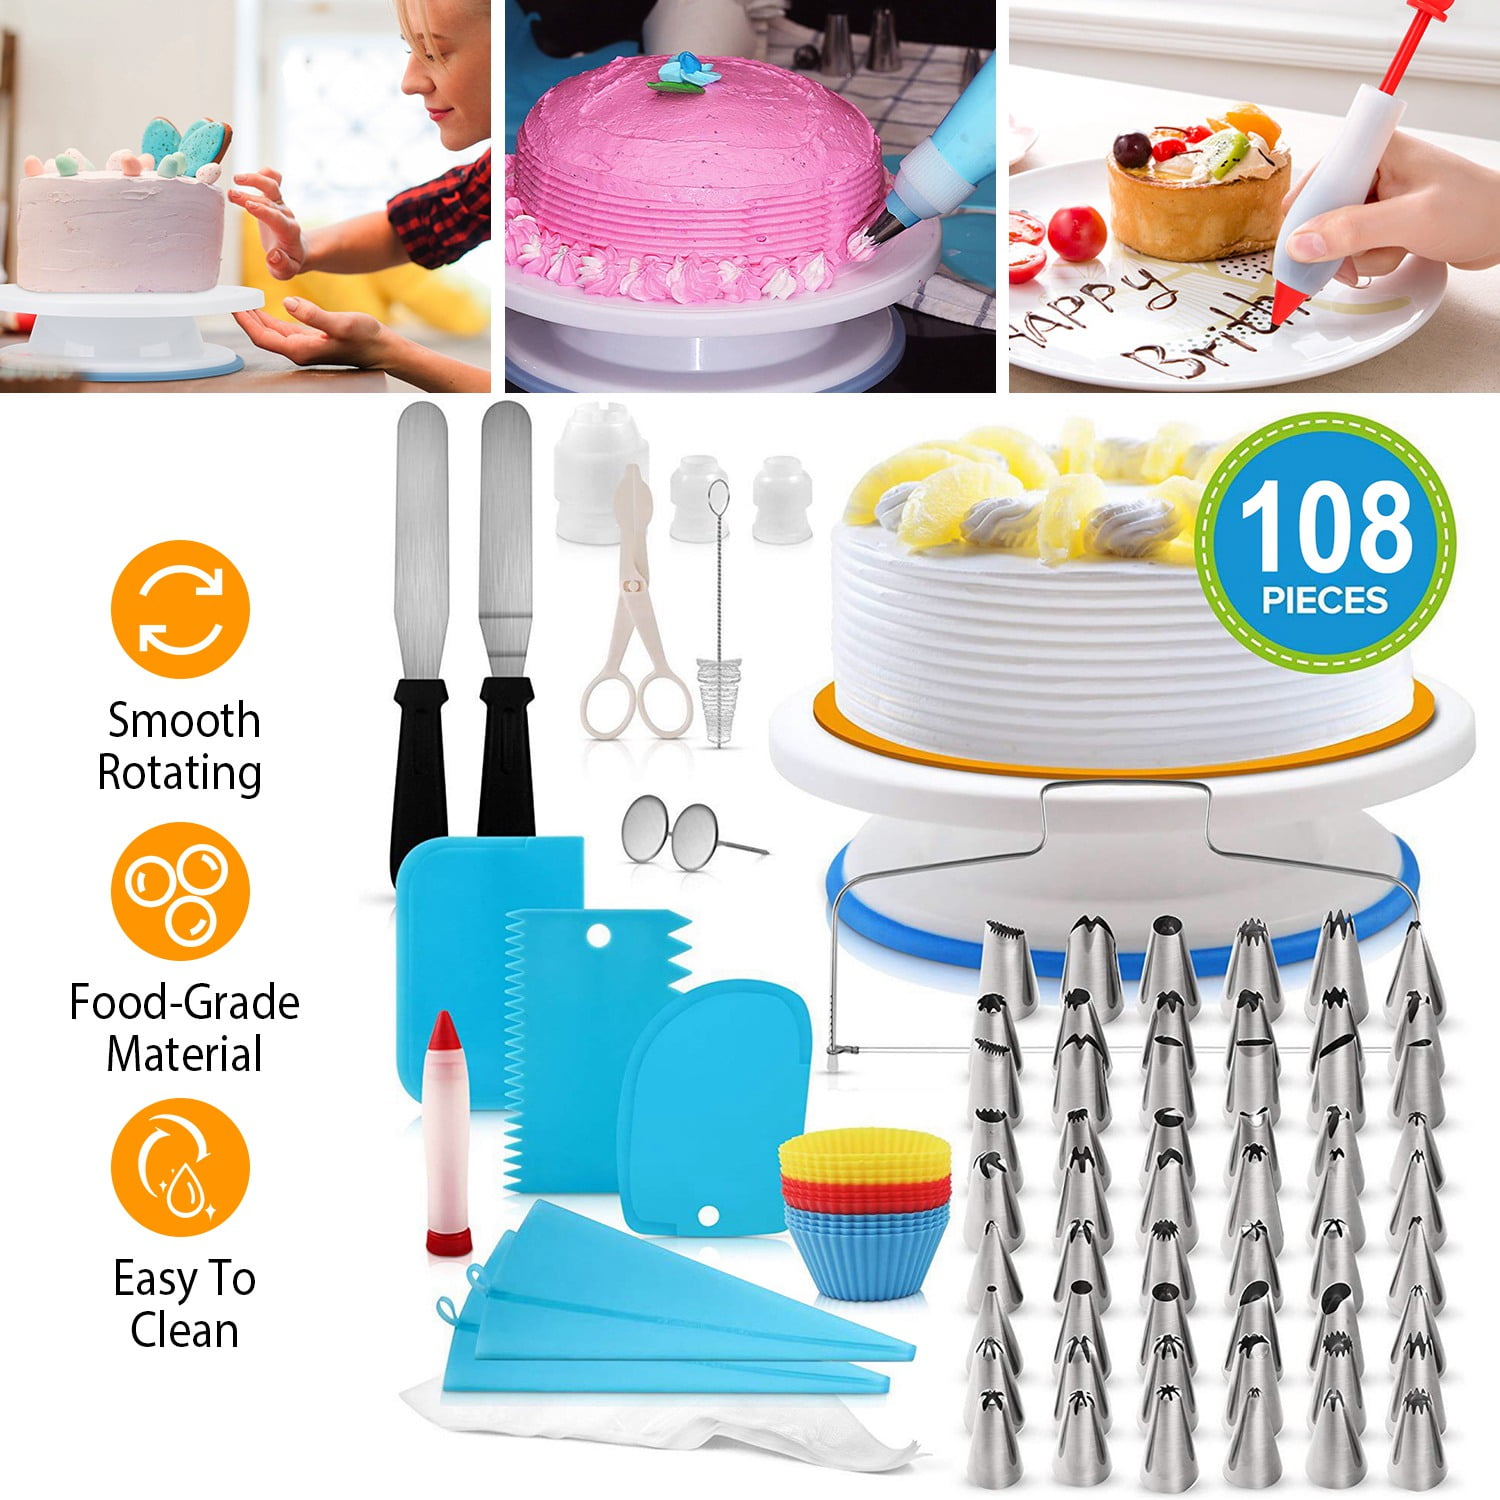 700PCs Cake Decorating Supplies Kit With Baking Supplies- Cake Decorating  Tools With Springform Pans, Cake Leveler, Cake Turntable, Numbered Piping  Tips, Icing Spatulas, Fondant Tools And More